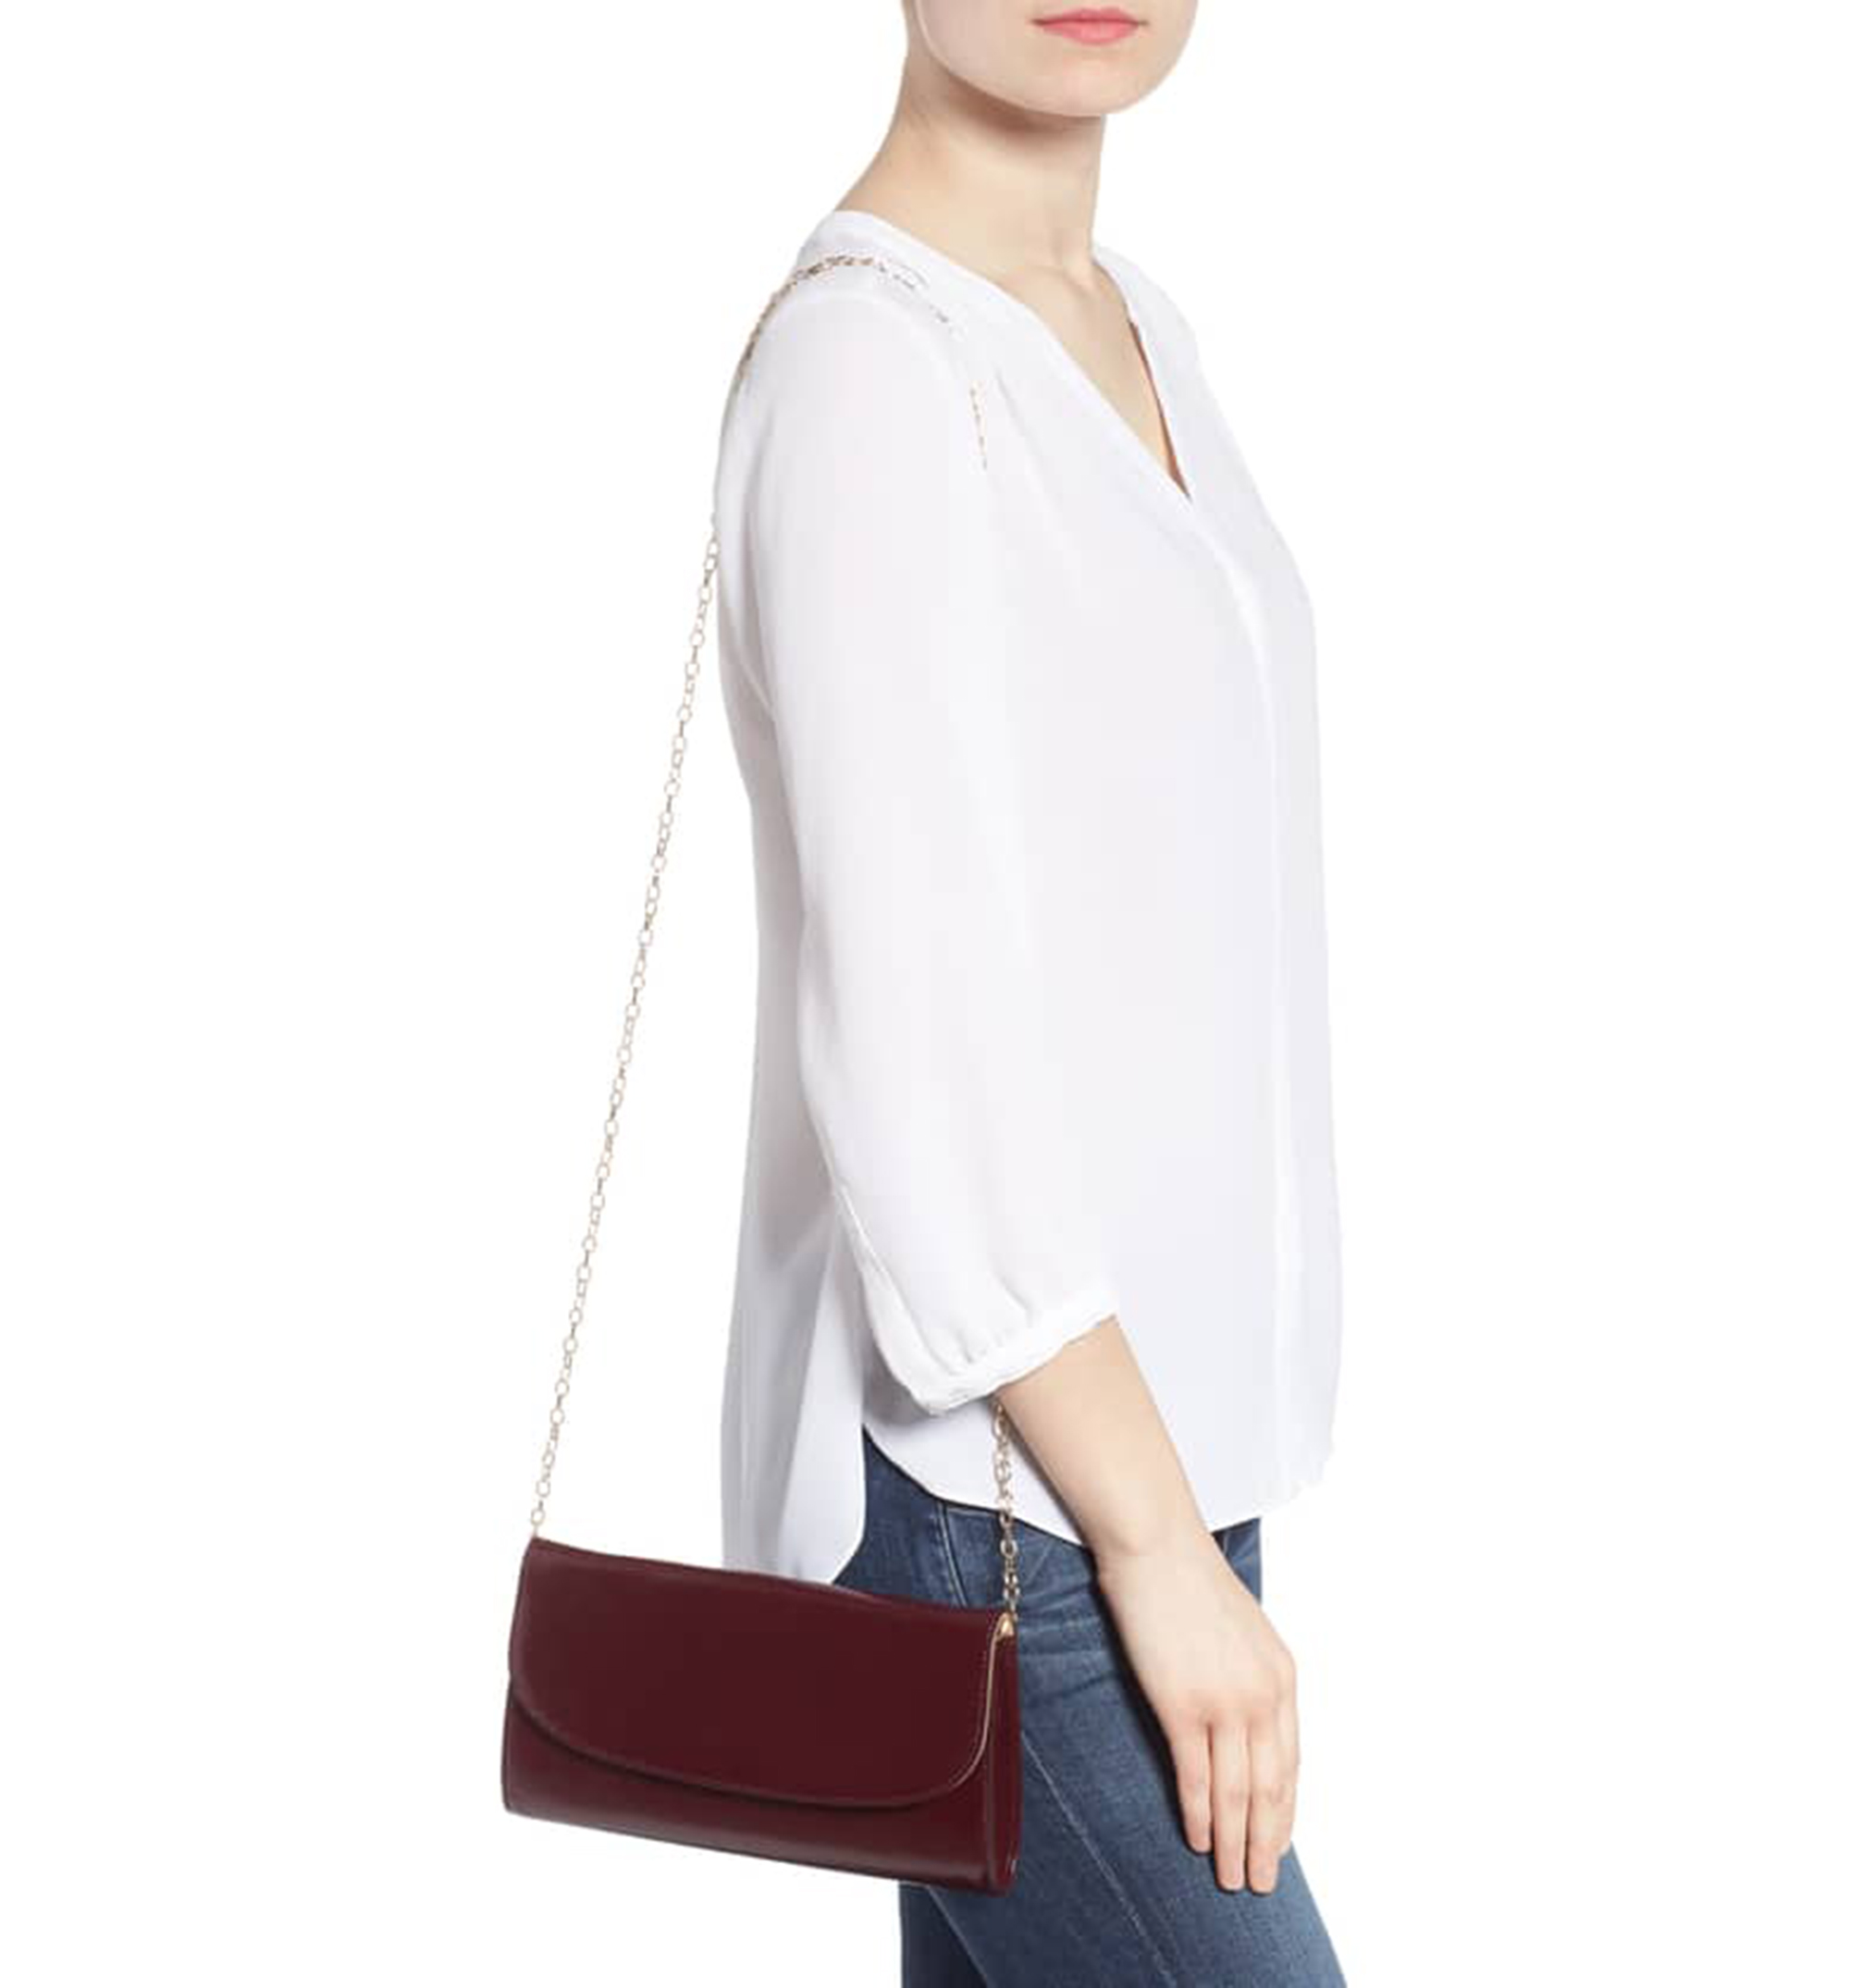 cardigan junkie: Things every girl needs: A hands free purse